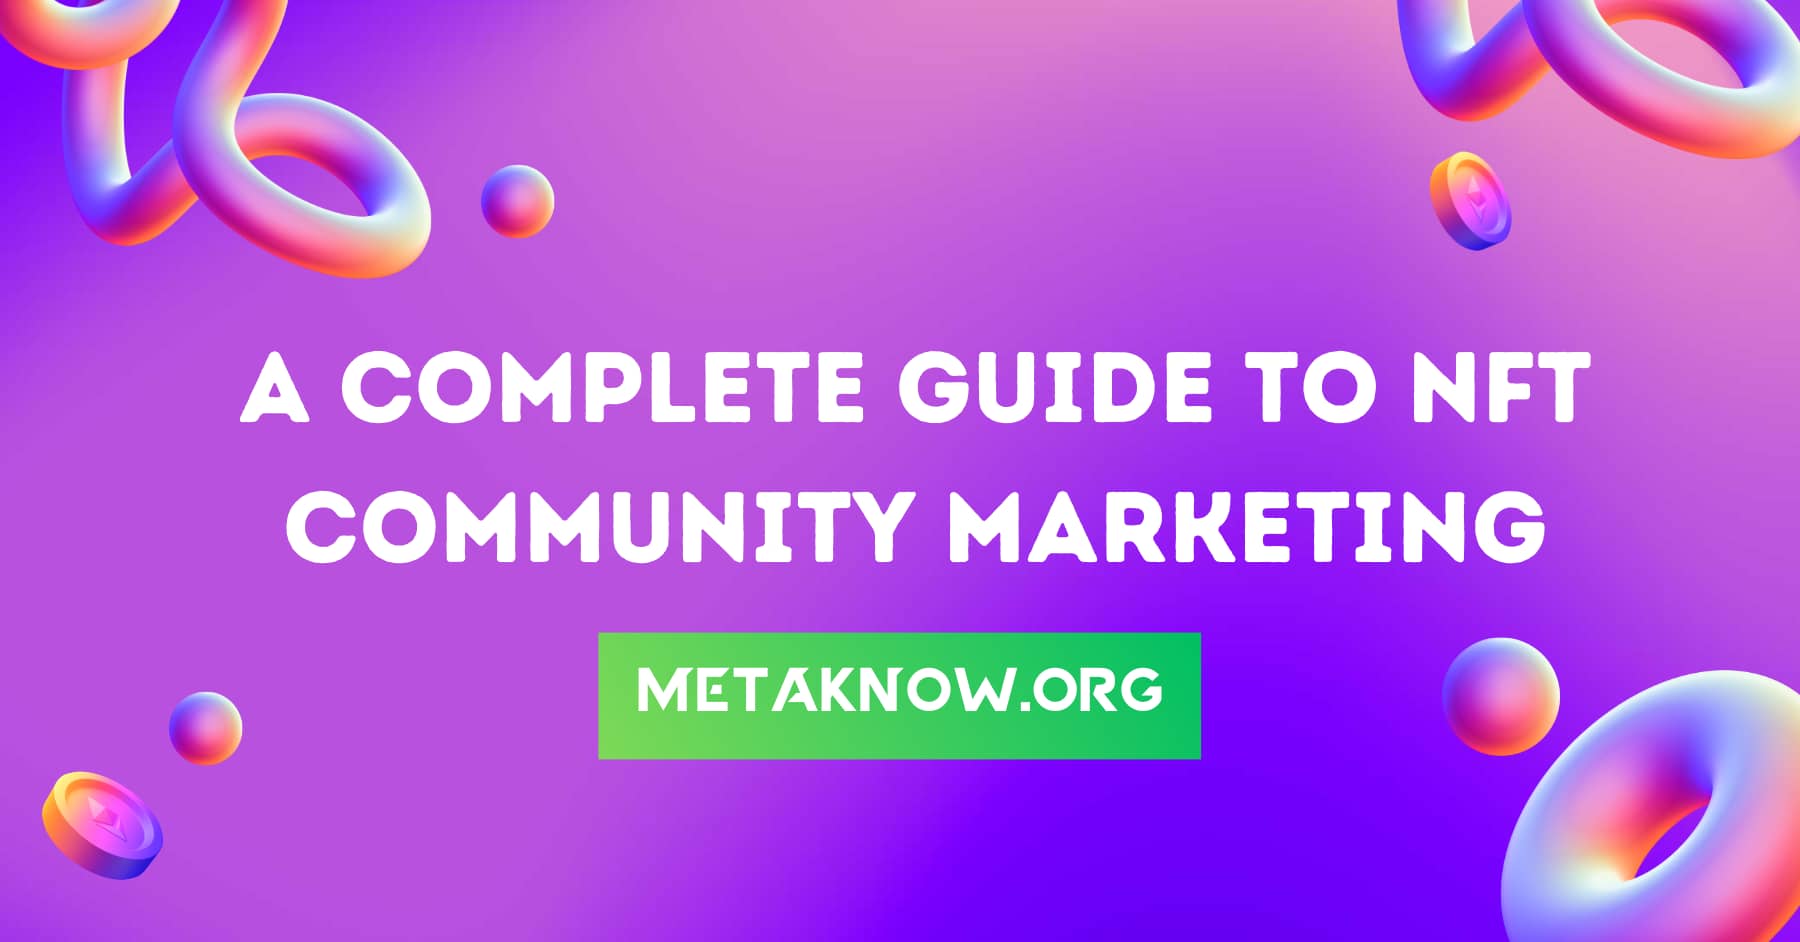 A Complete Guide to NFT Community Marketing